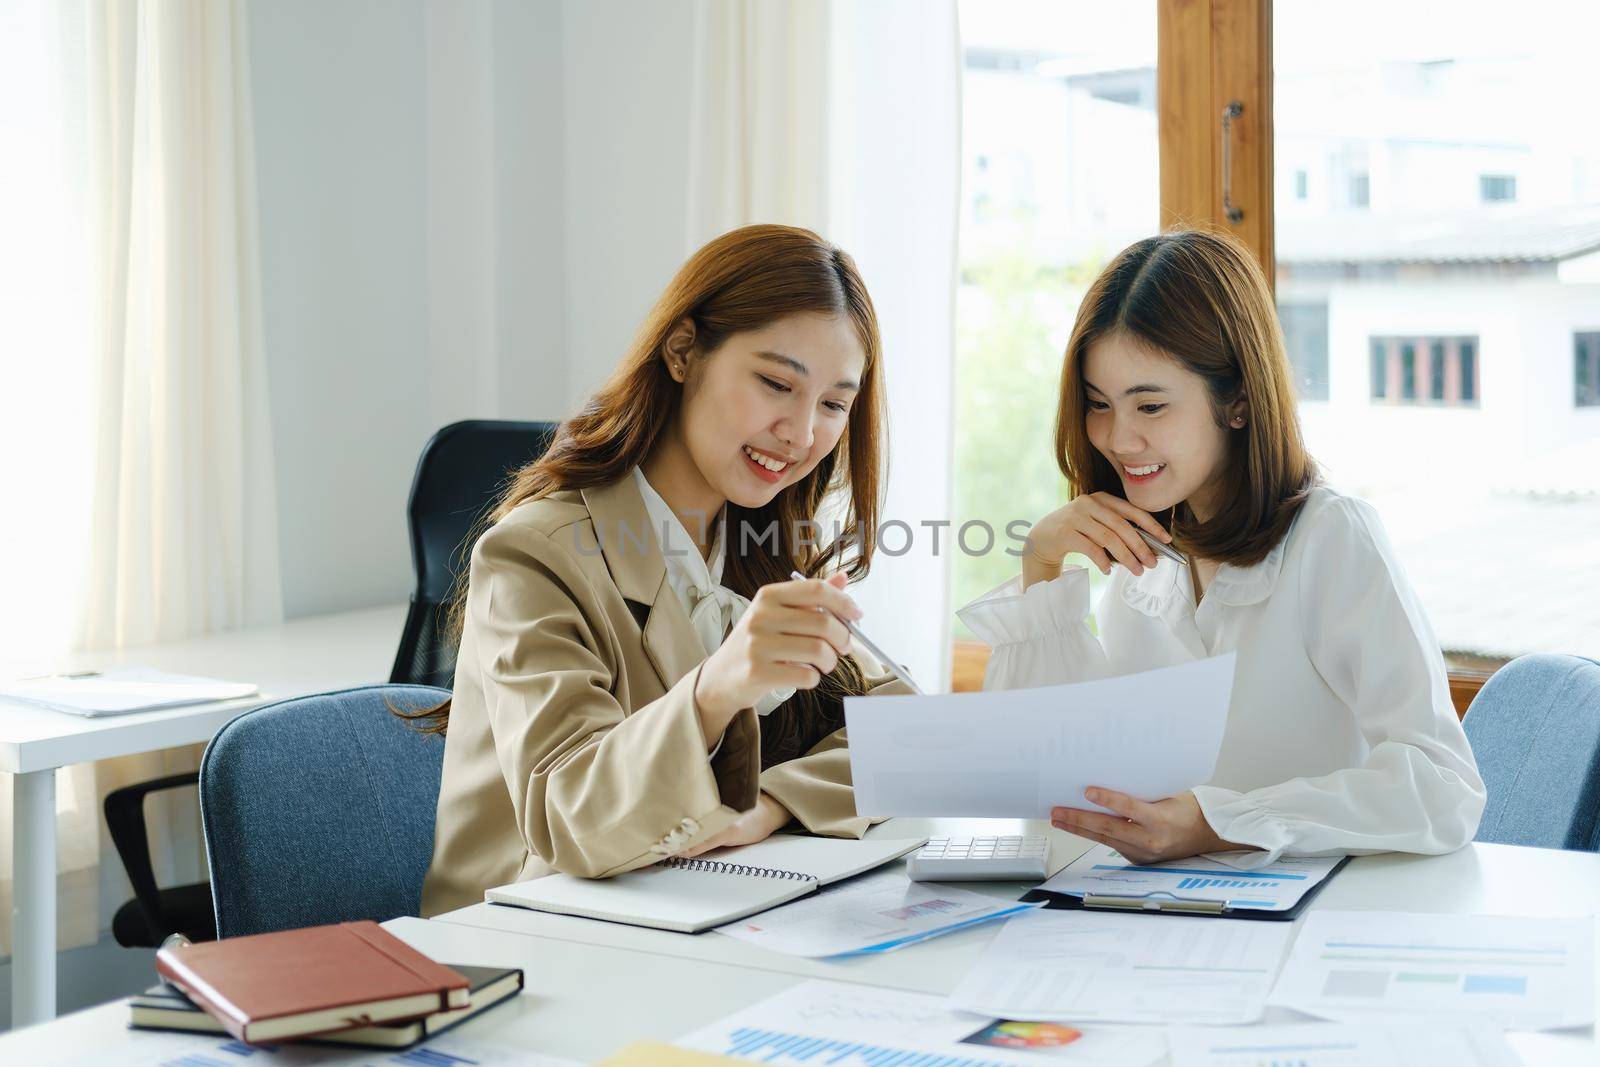 Negotiation, Analysis, Discussion, Portrait of an Asian woman economist and marketer pointing to a financial data sheet to plan investments to prevent risks and losses for the company.